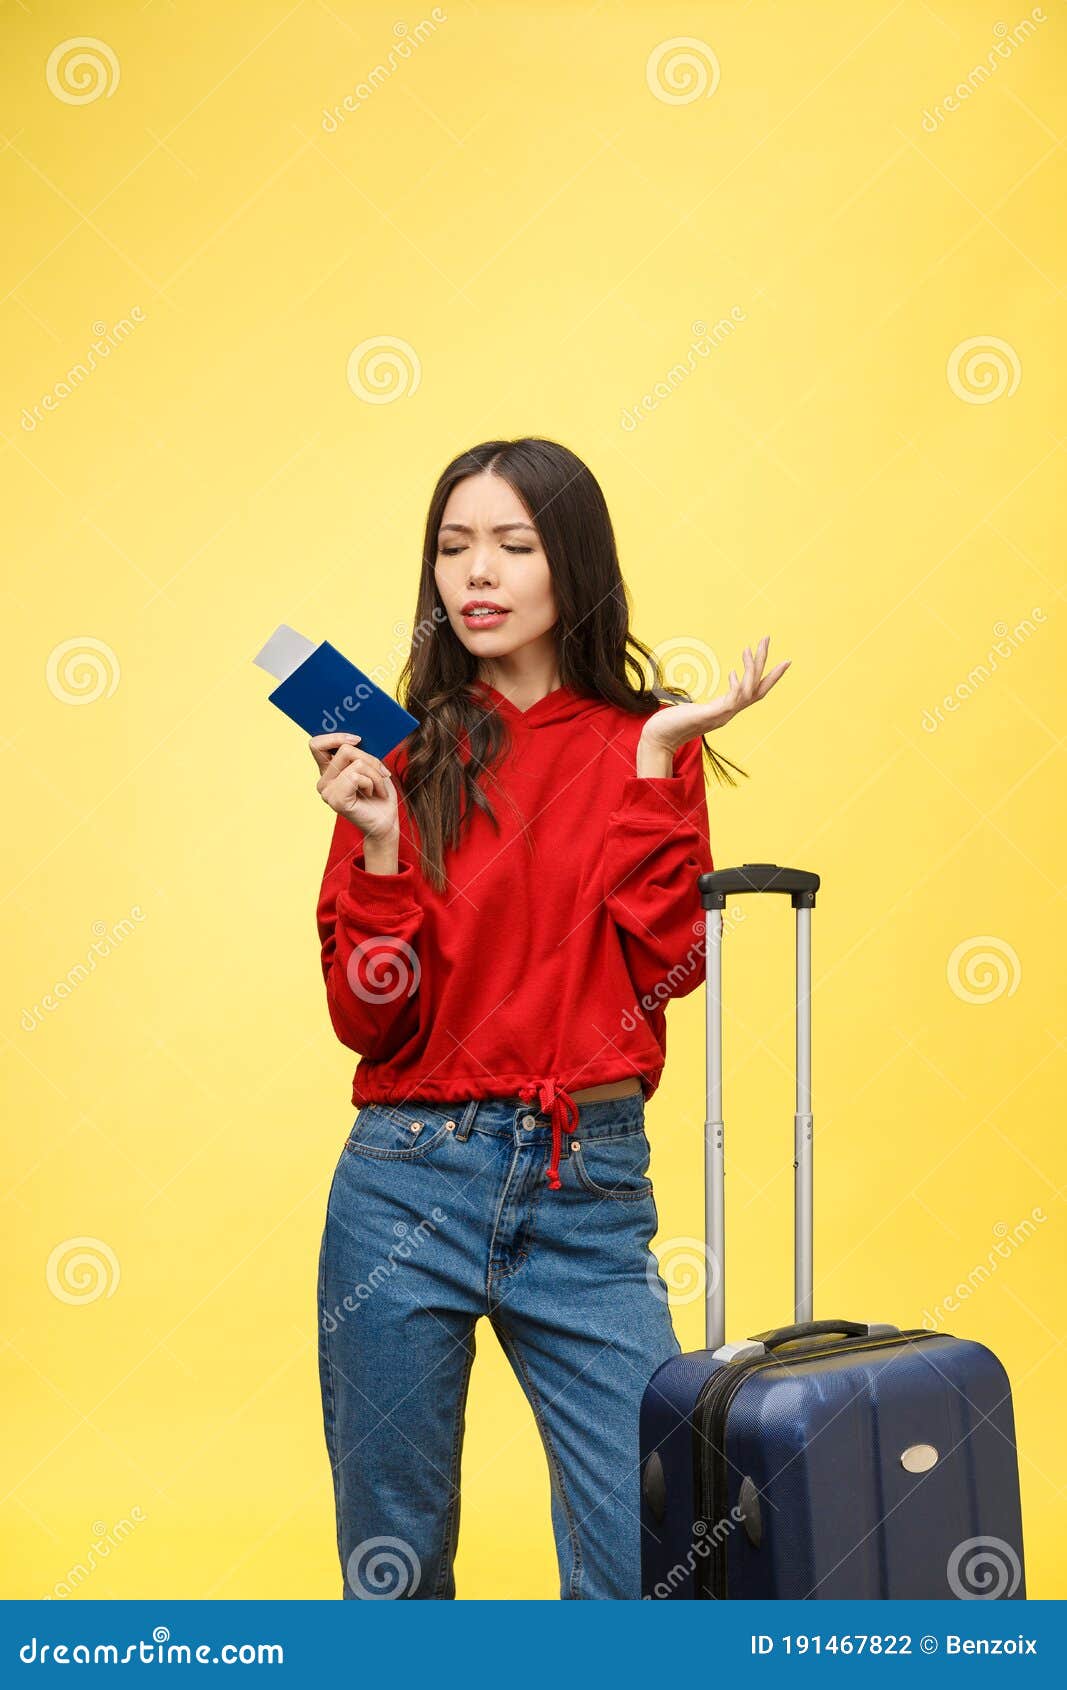 Young Beautiful Woman Holding Passport Over Isolated Background ...